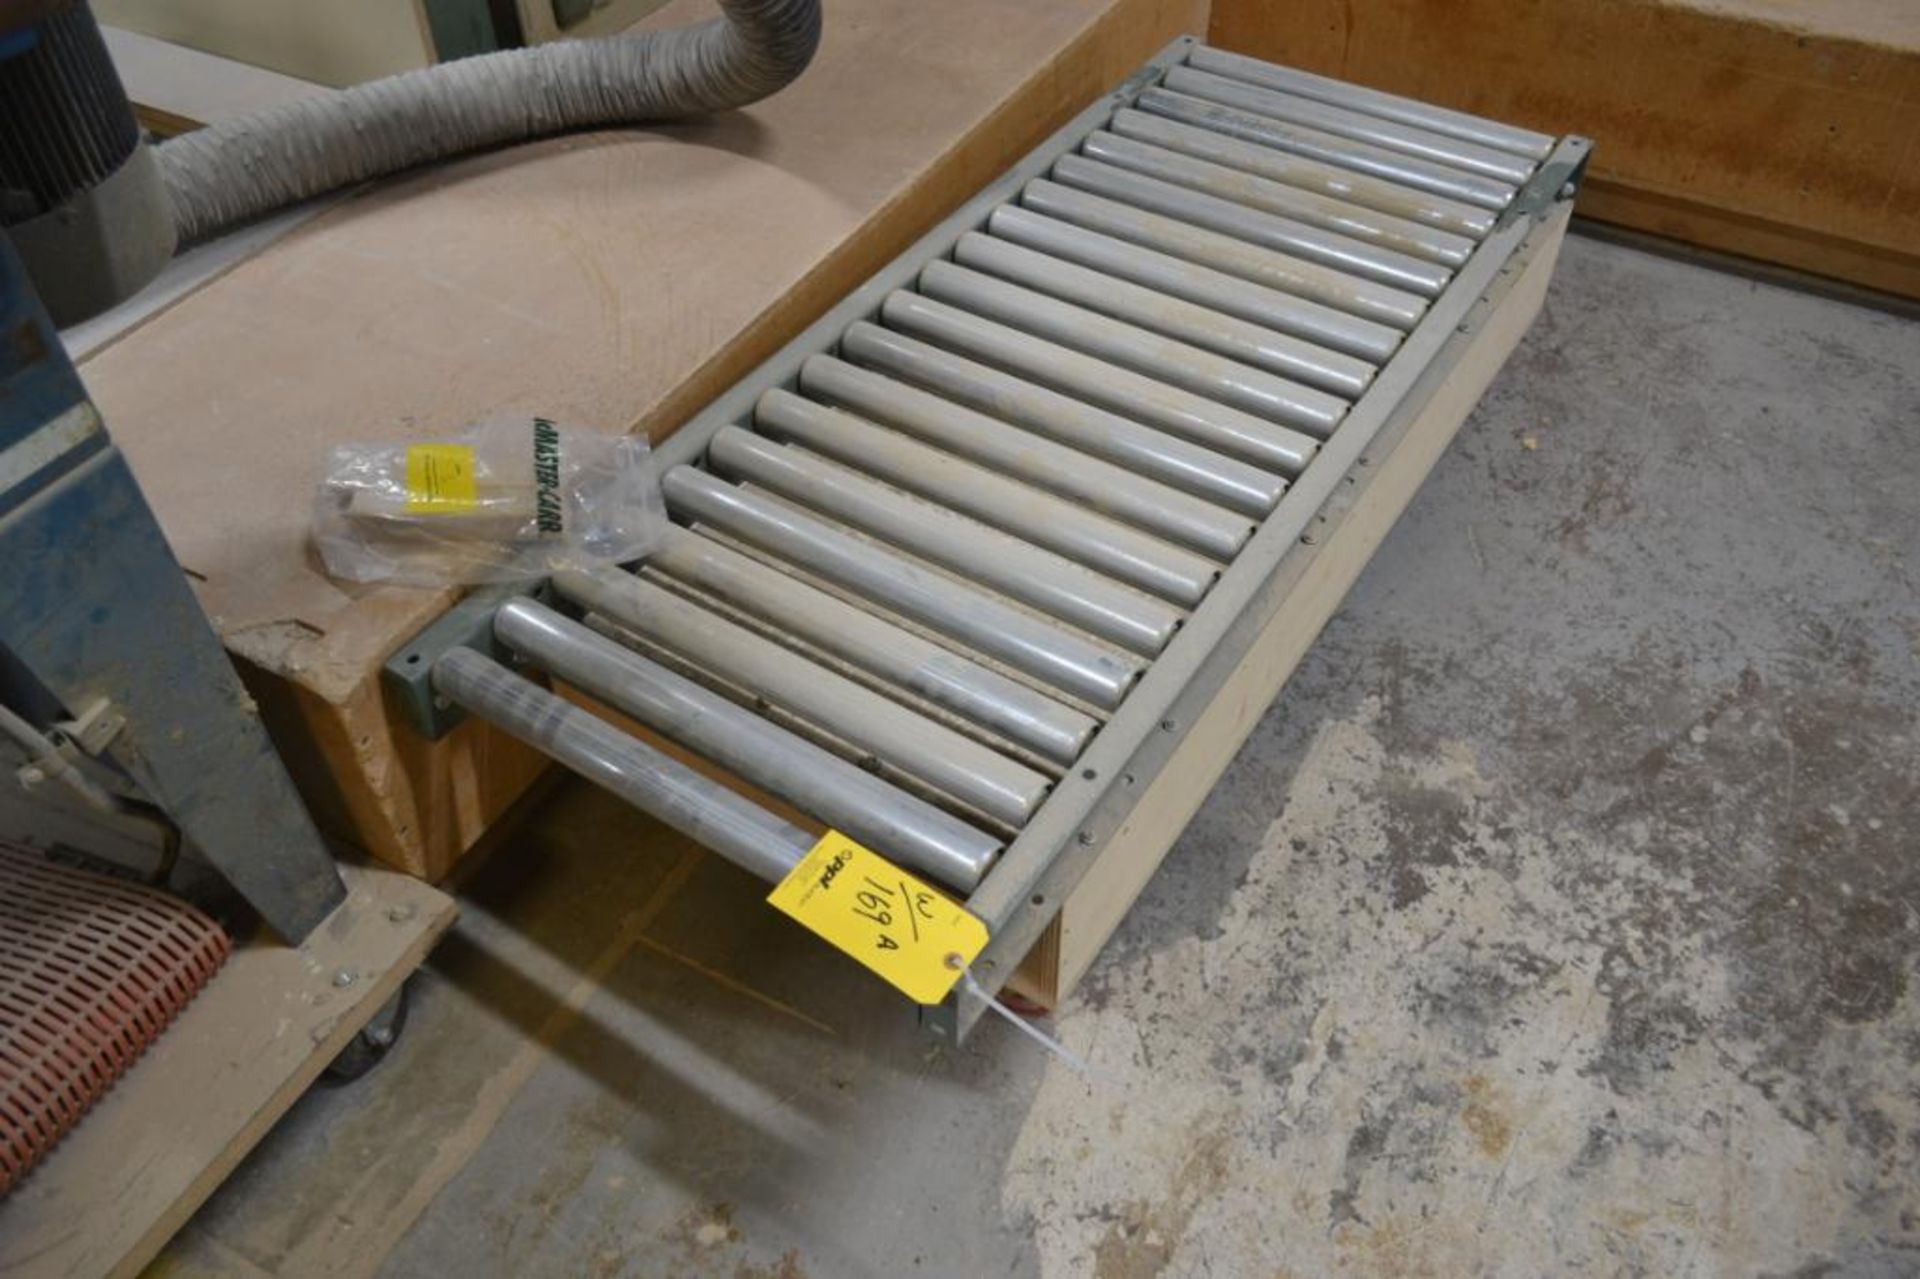 LOT: (1) 5 ft. x 15 in. Portable Roller Conveyer, (1) 5 ft. x 24 in. Portable Steel Conveyor Section - Image 2 of 2